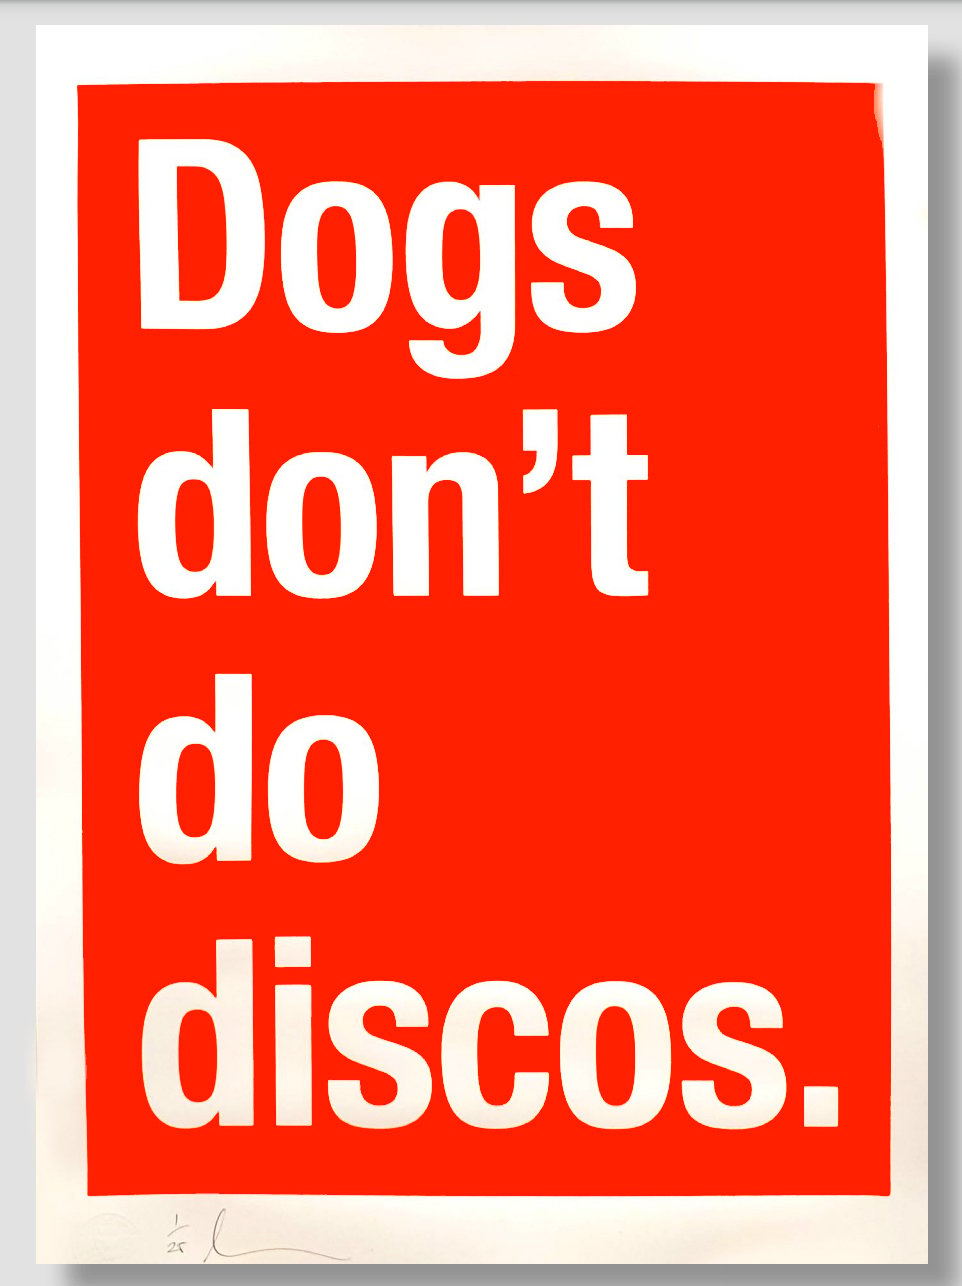 Image of  'Dogs don't do Discos' by Dave Buonaguidi